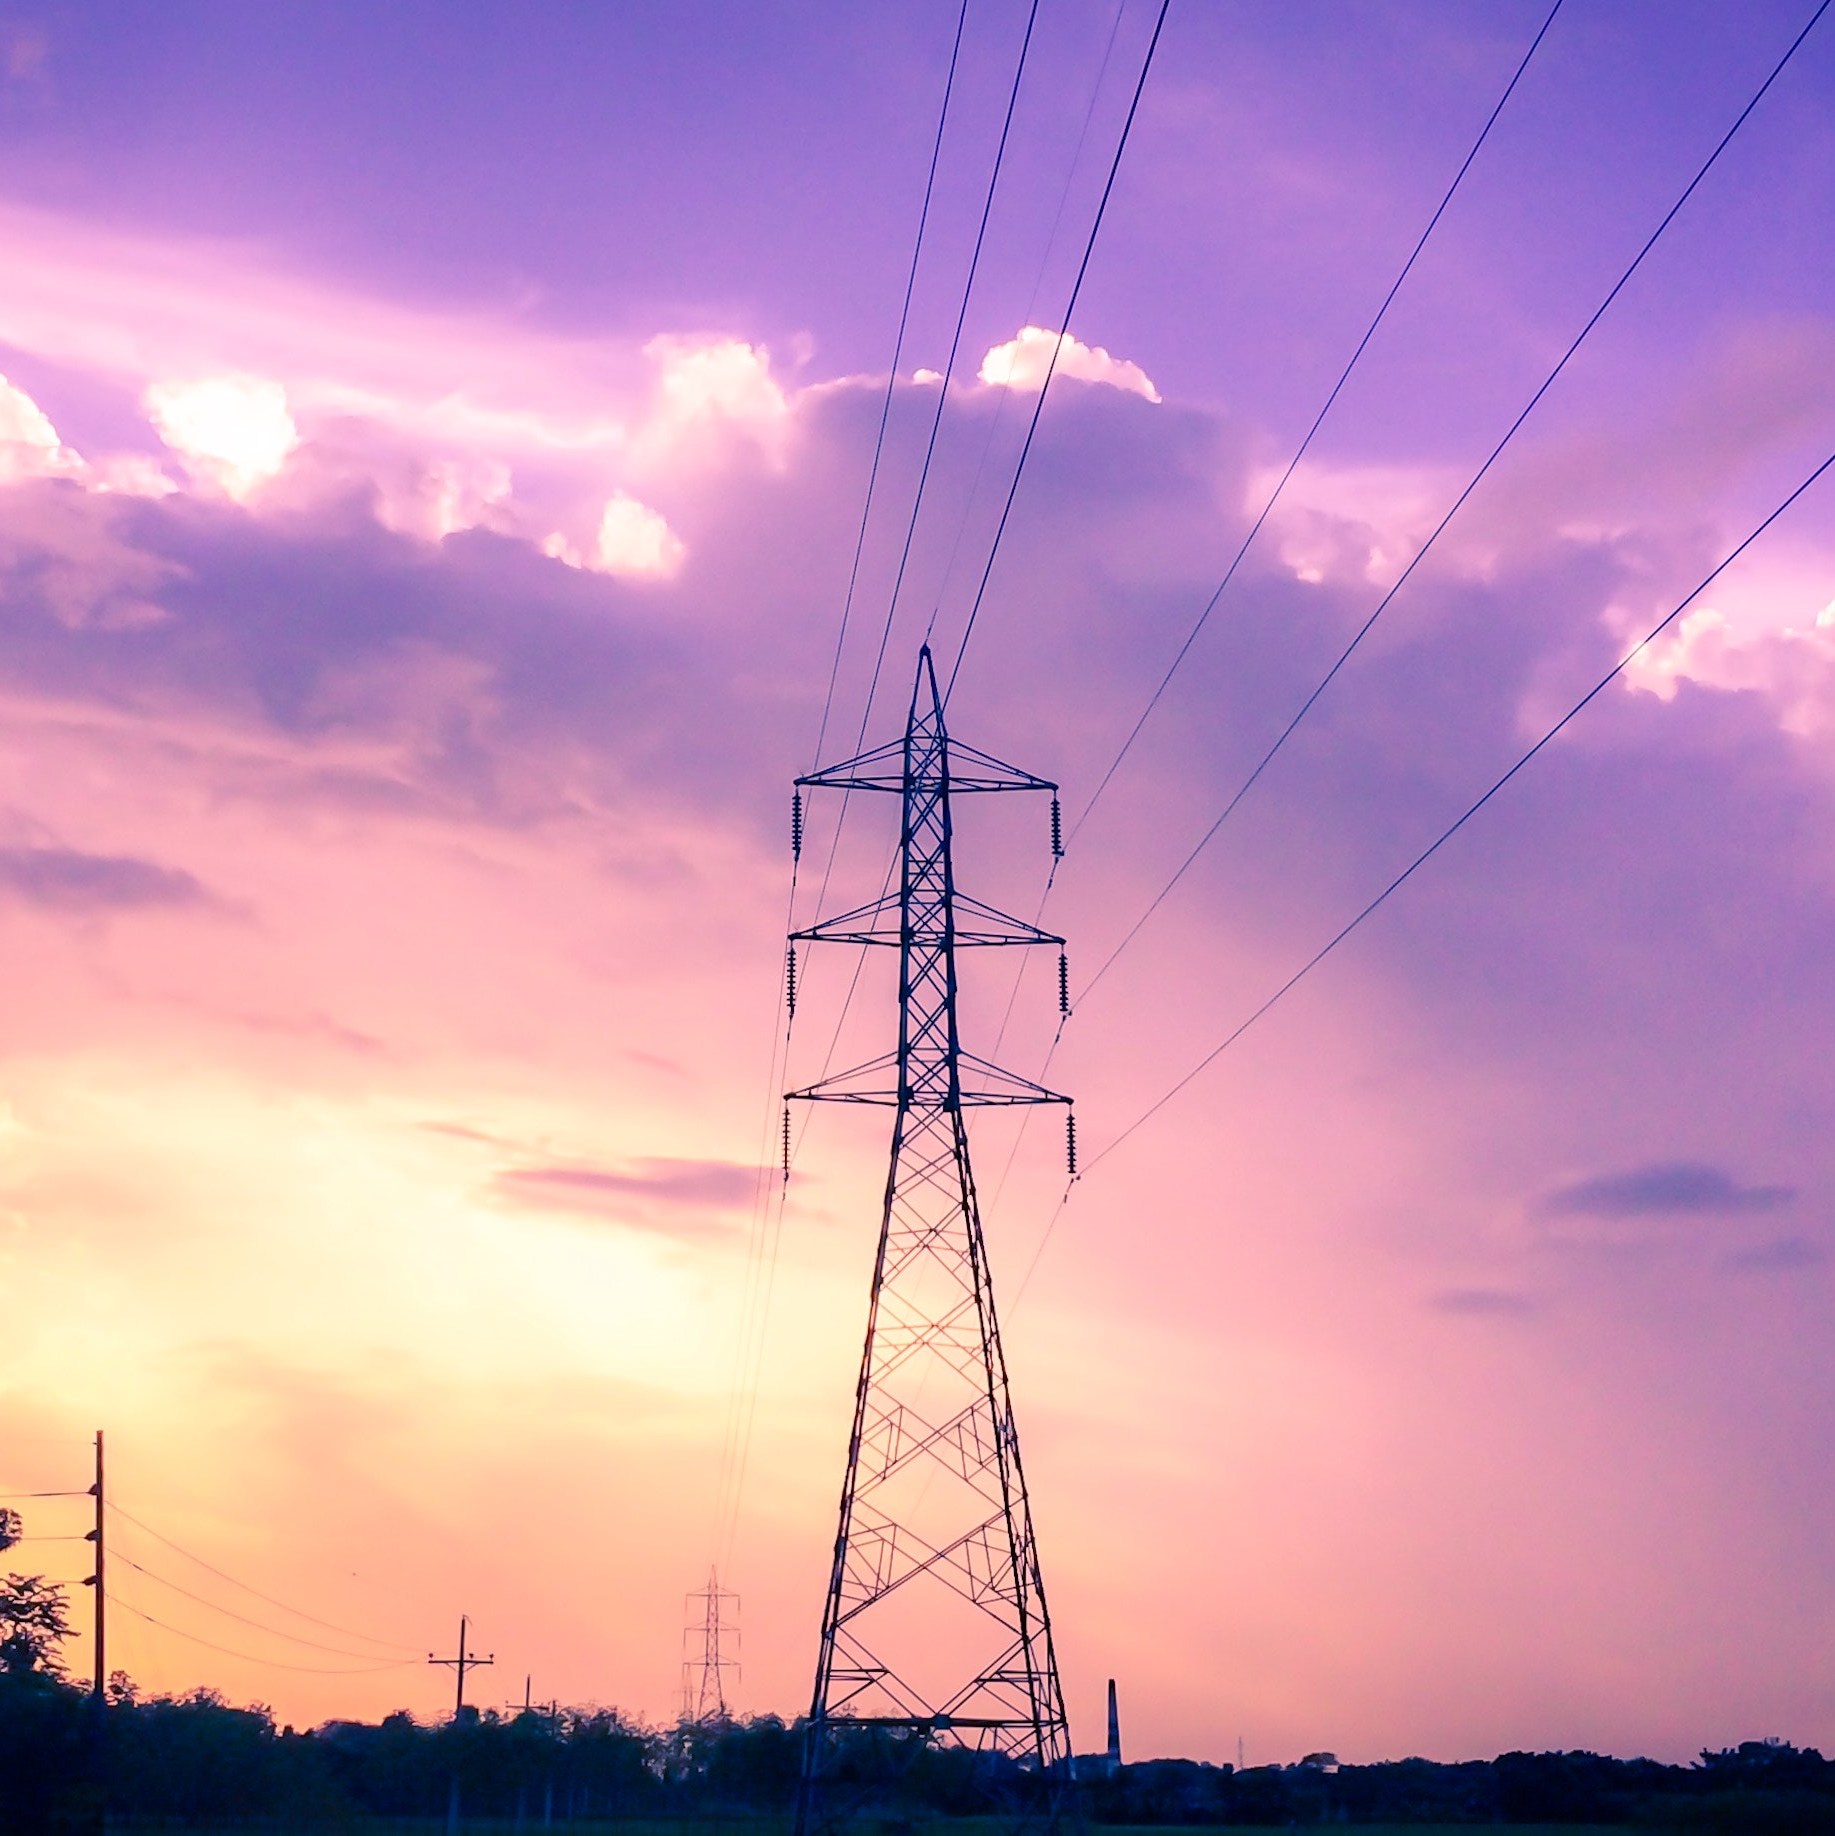 https://www.pexels.com/photo/photography-of-electric-tower-during-sunset-923953/